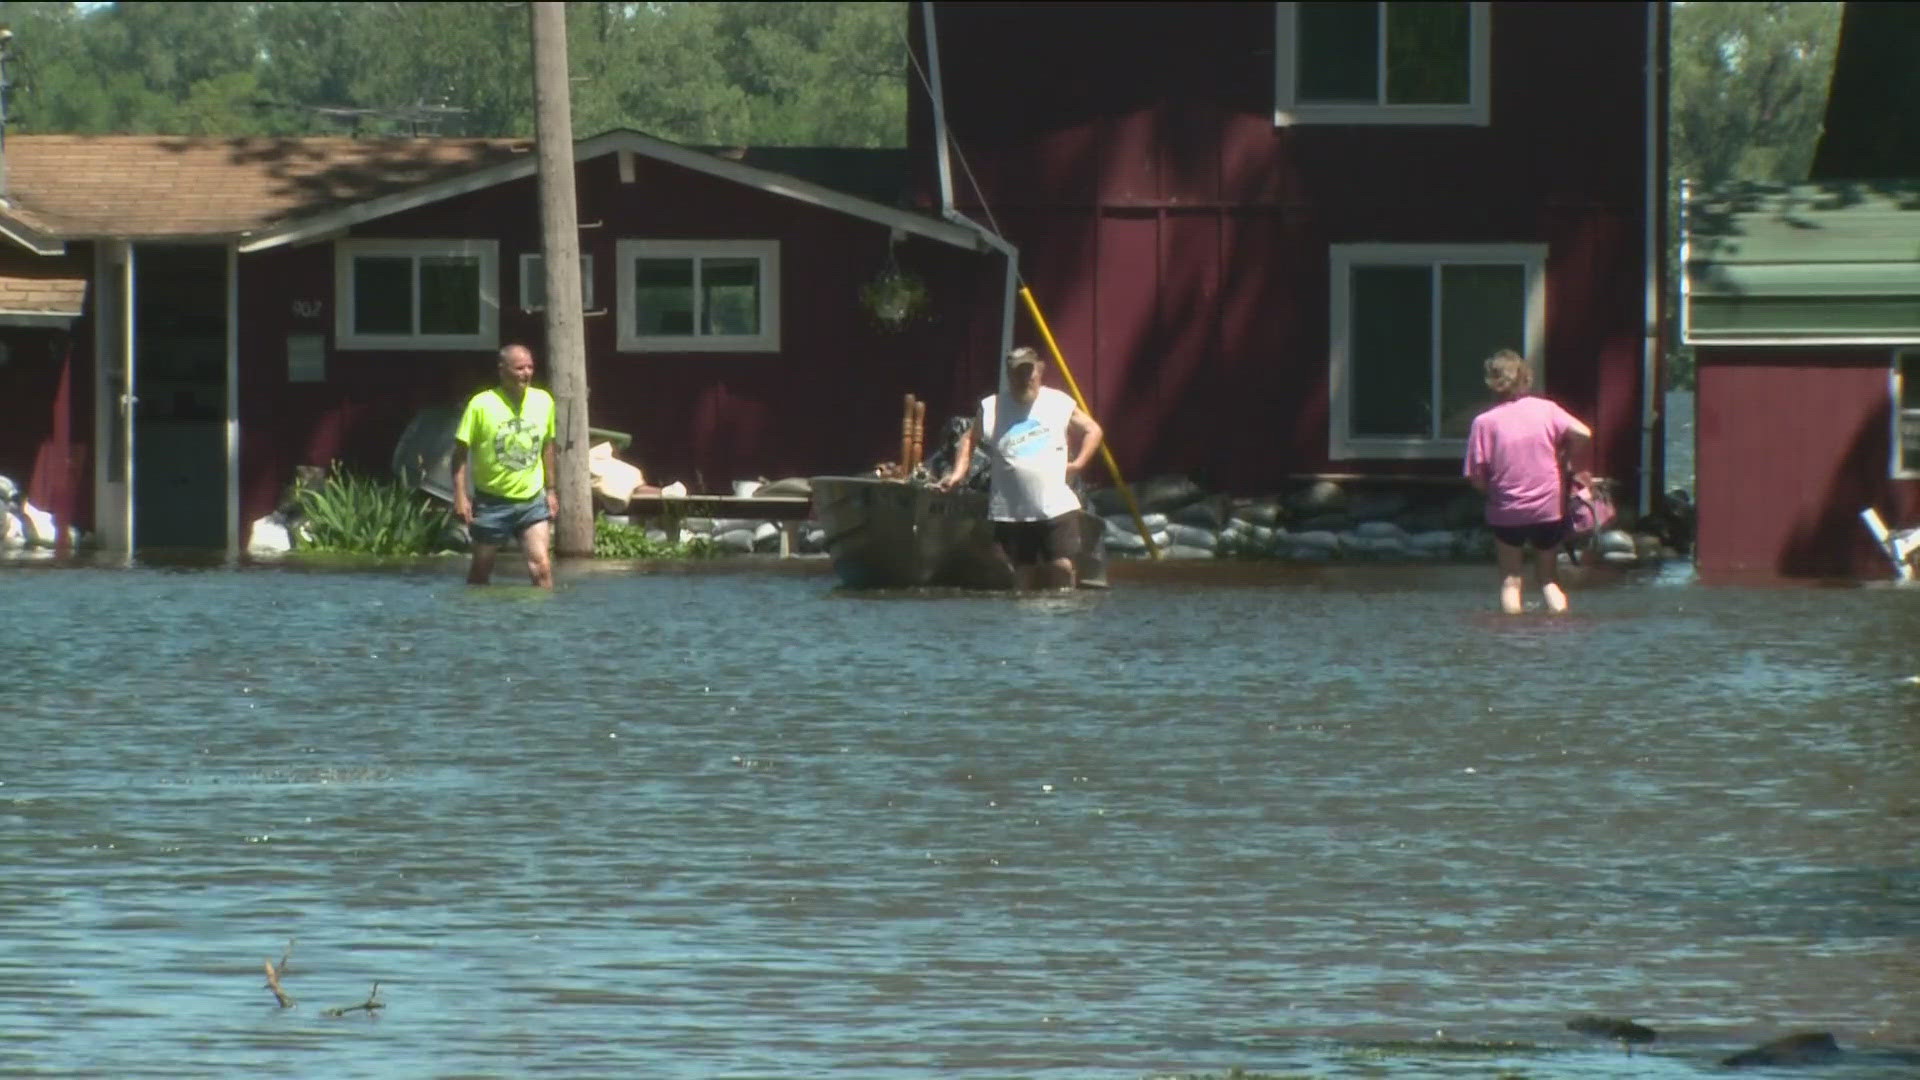 Rich Gorell and his wife were forced to evacuate and leave town on Friday.